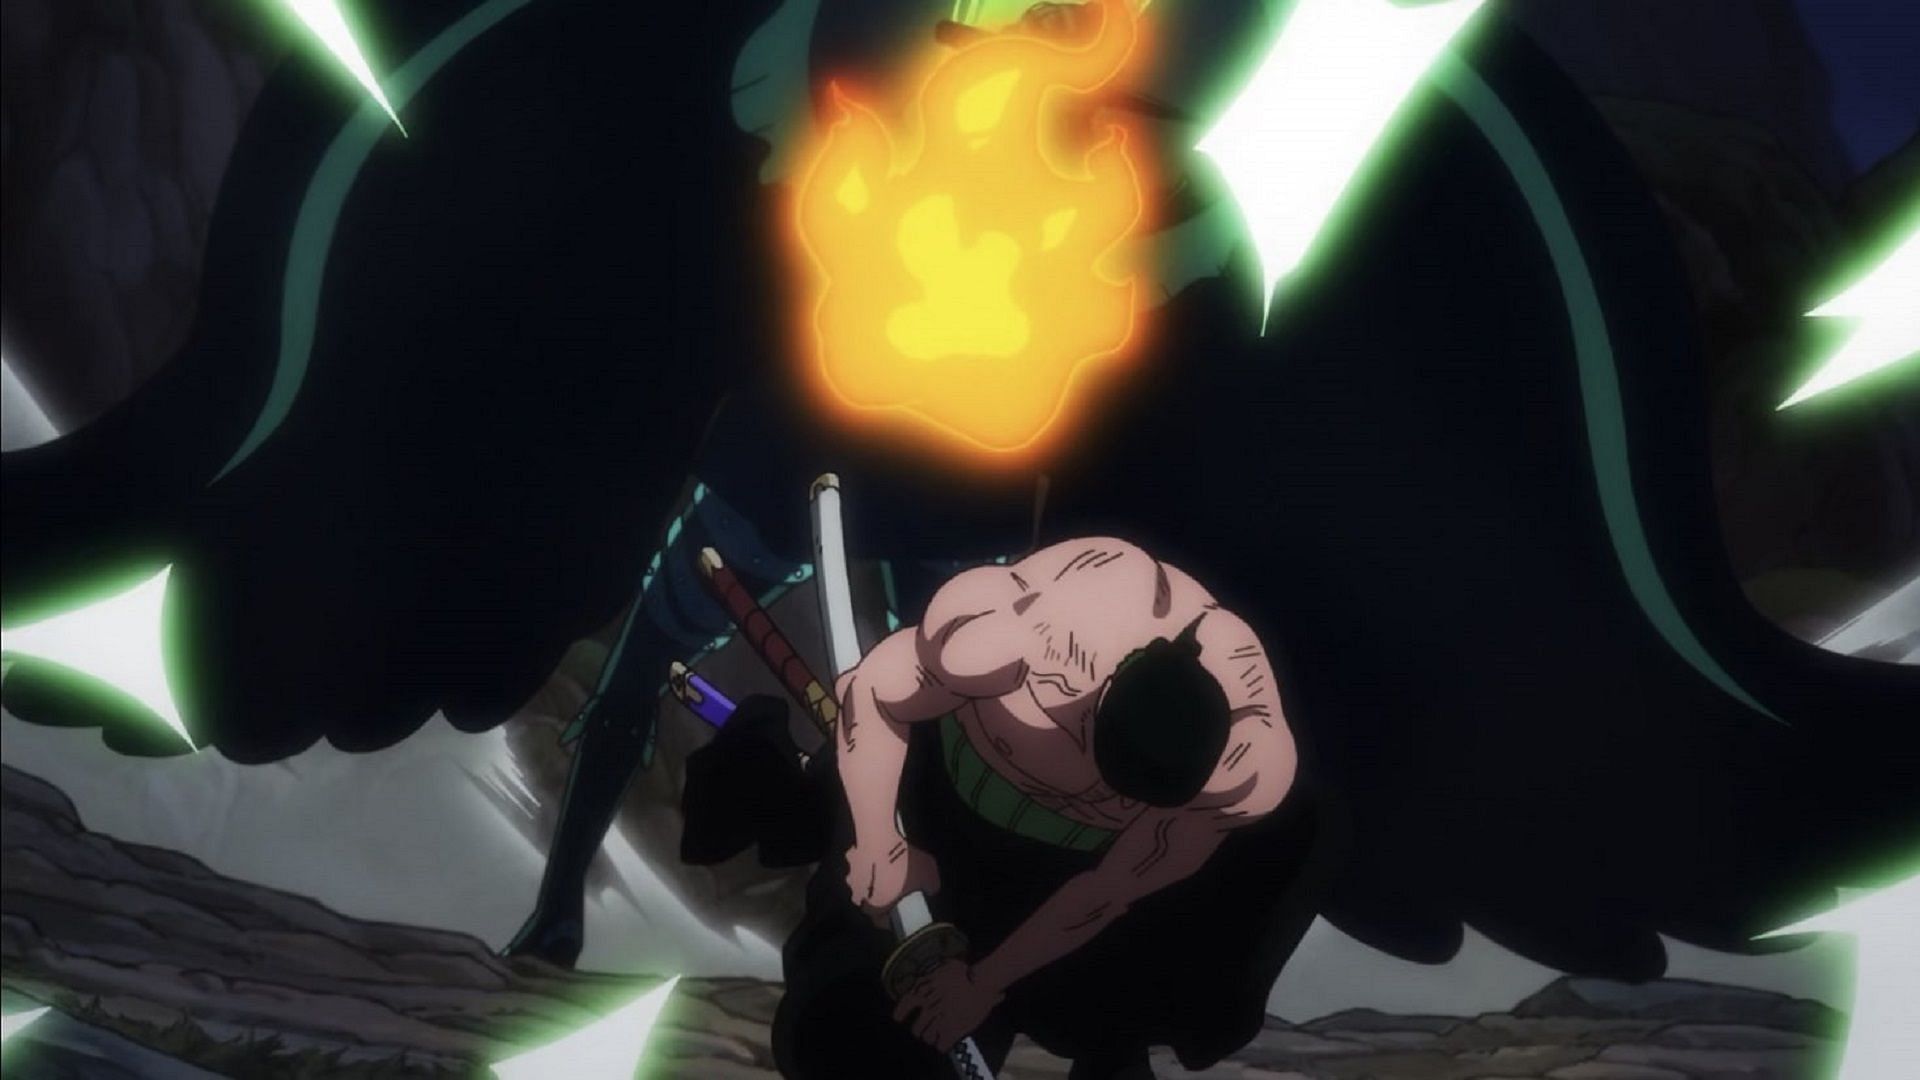 Zoro blitzed King, but the latter endured the strike with no damage (Image via Toei Animation, One Piece)